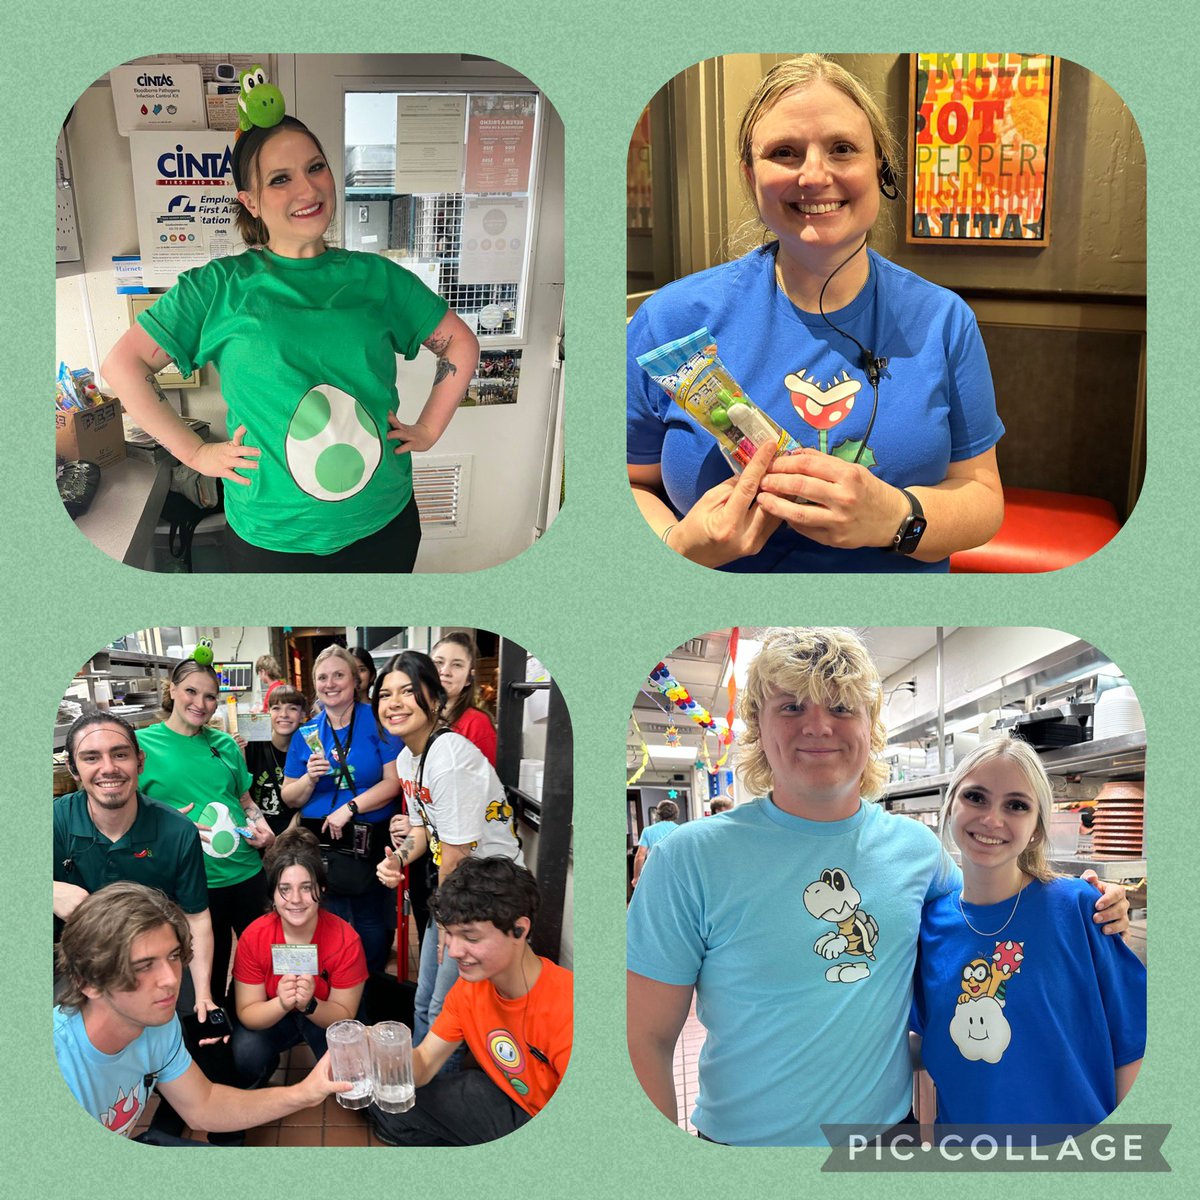 Mario Party at Justin Rd!! Love this team for participating and we had a blast this shift! A fun way to kick off this last weekend of Margarita Madness! @sarahjunco @cassidyhuska @wherry_lisa #ChilisLove